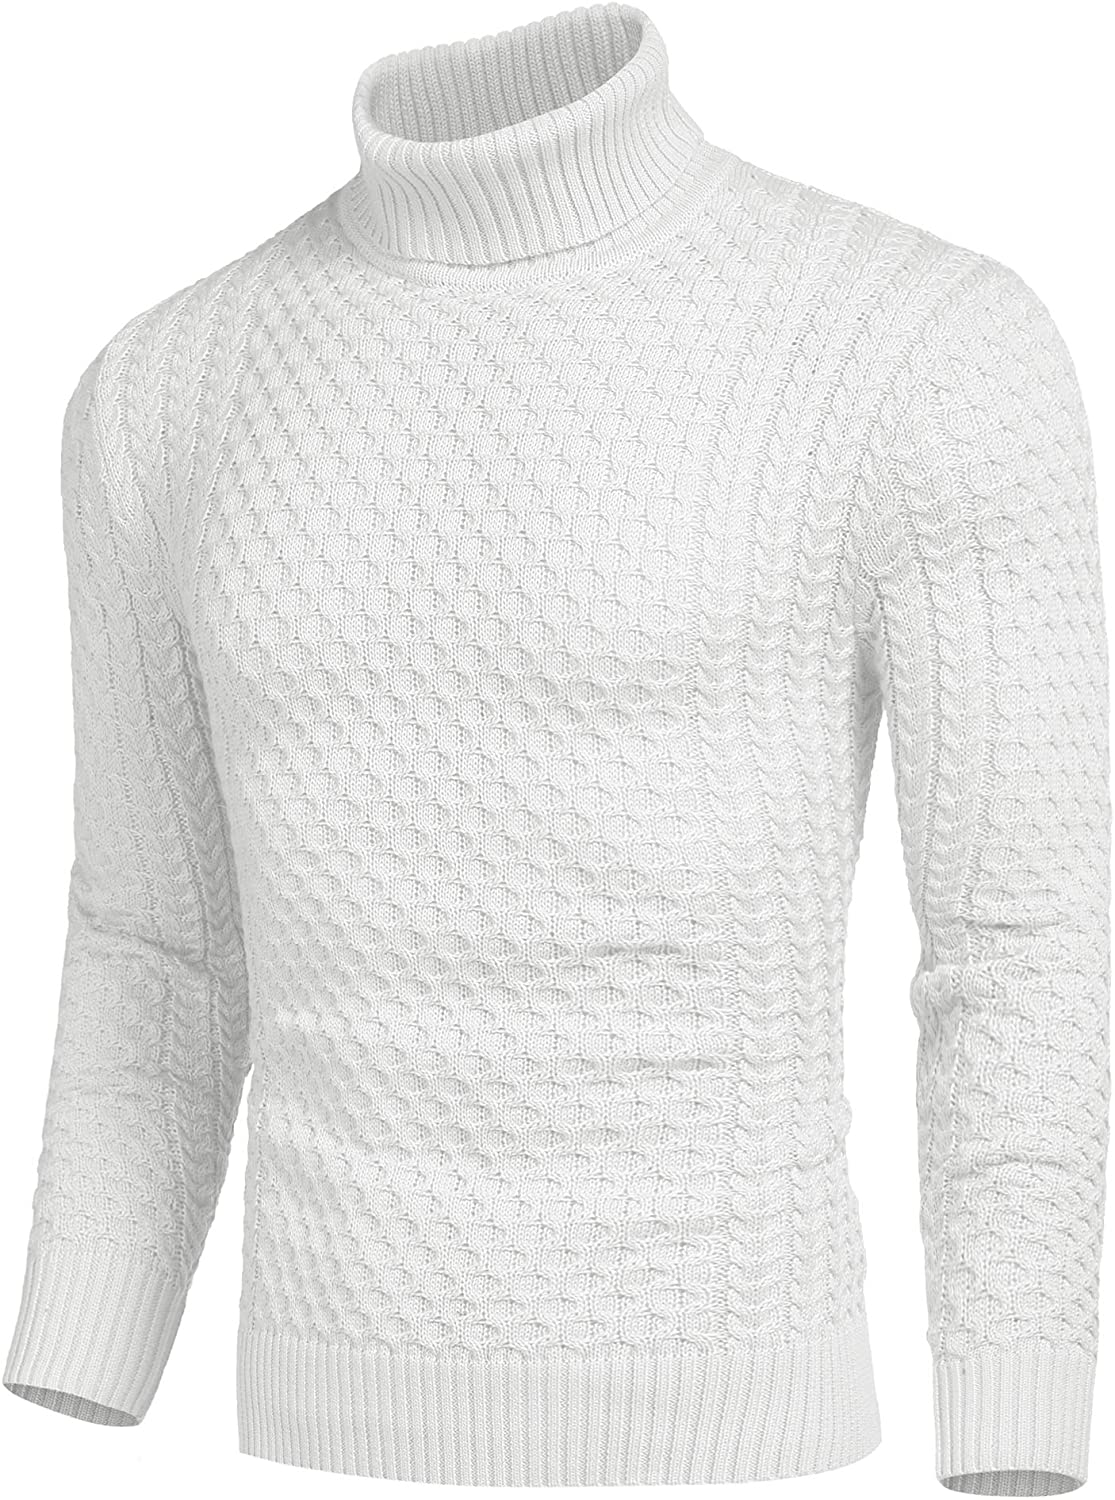 Coofandy Mens Turtleneck Pullover Knitted Long Sleeve Shirt Fine Knit Sweater Casual Slim Fit Basic Mens Pullover